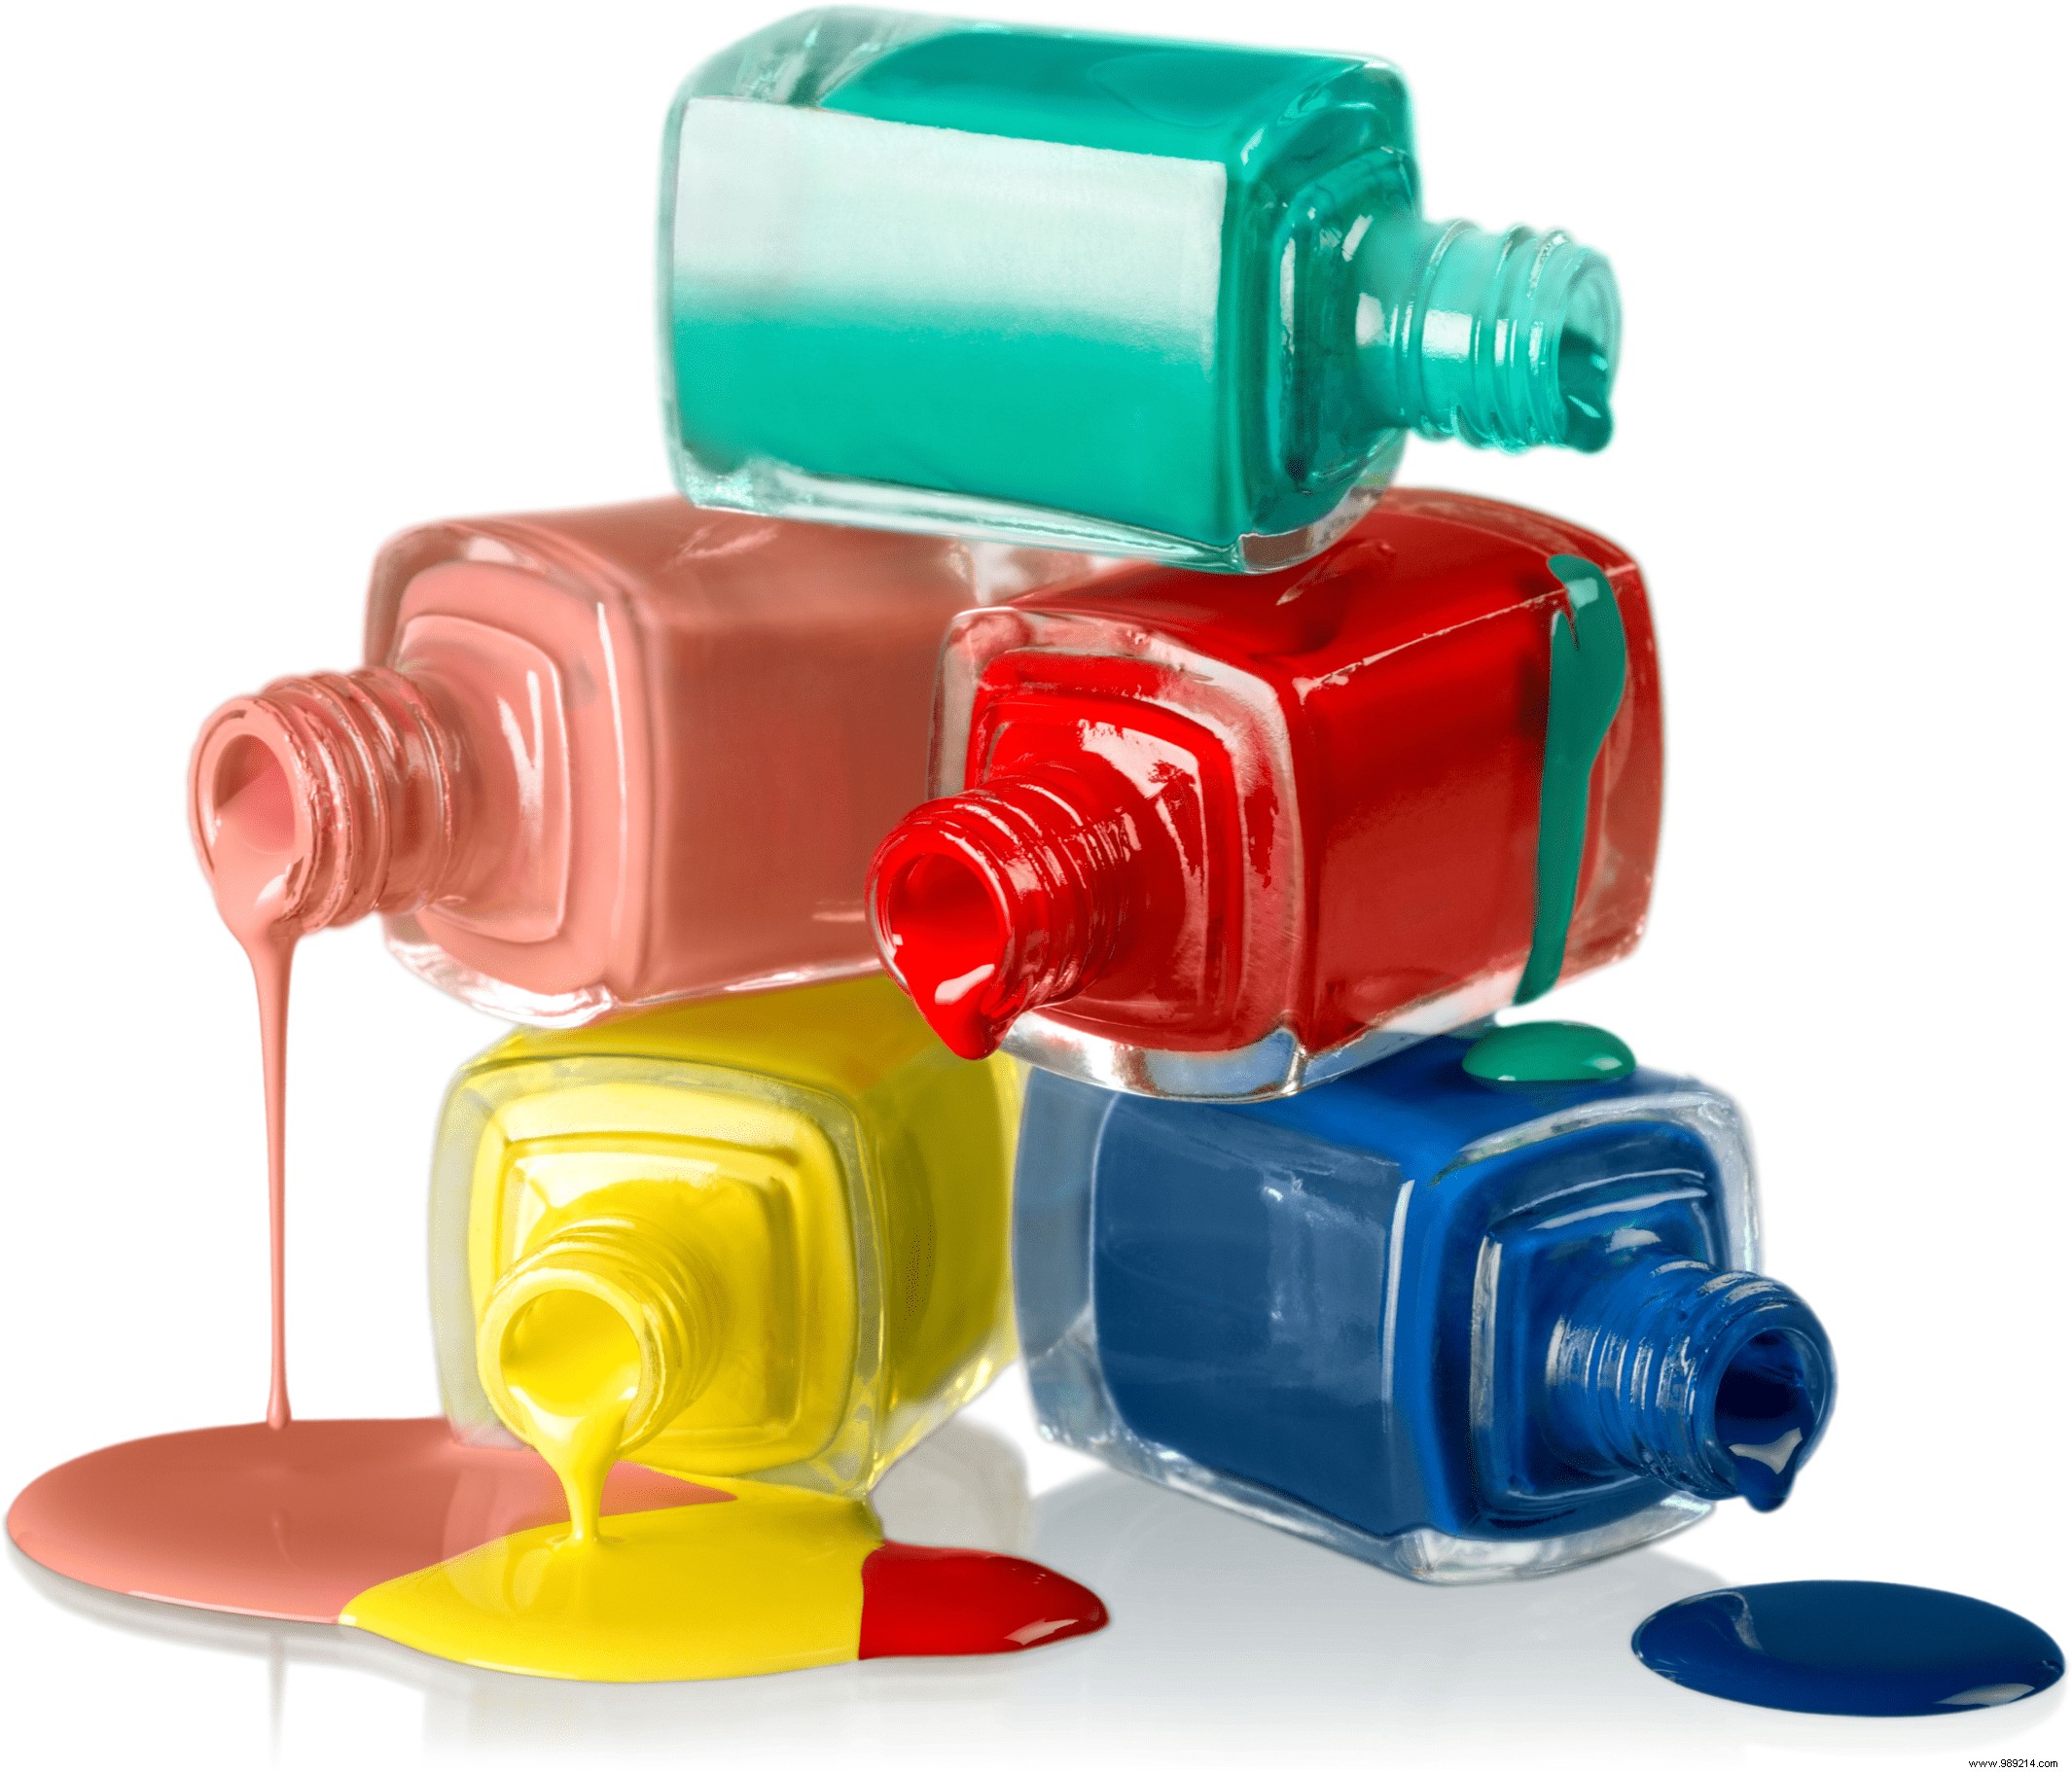 How to choose the color of your nail polish? 